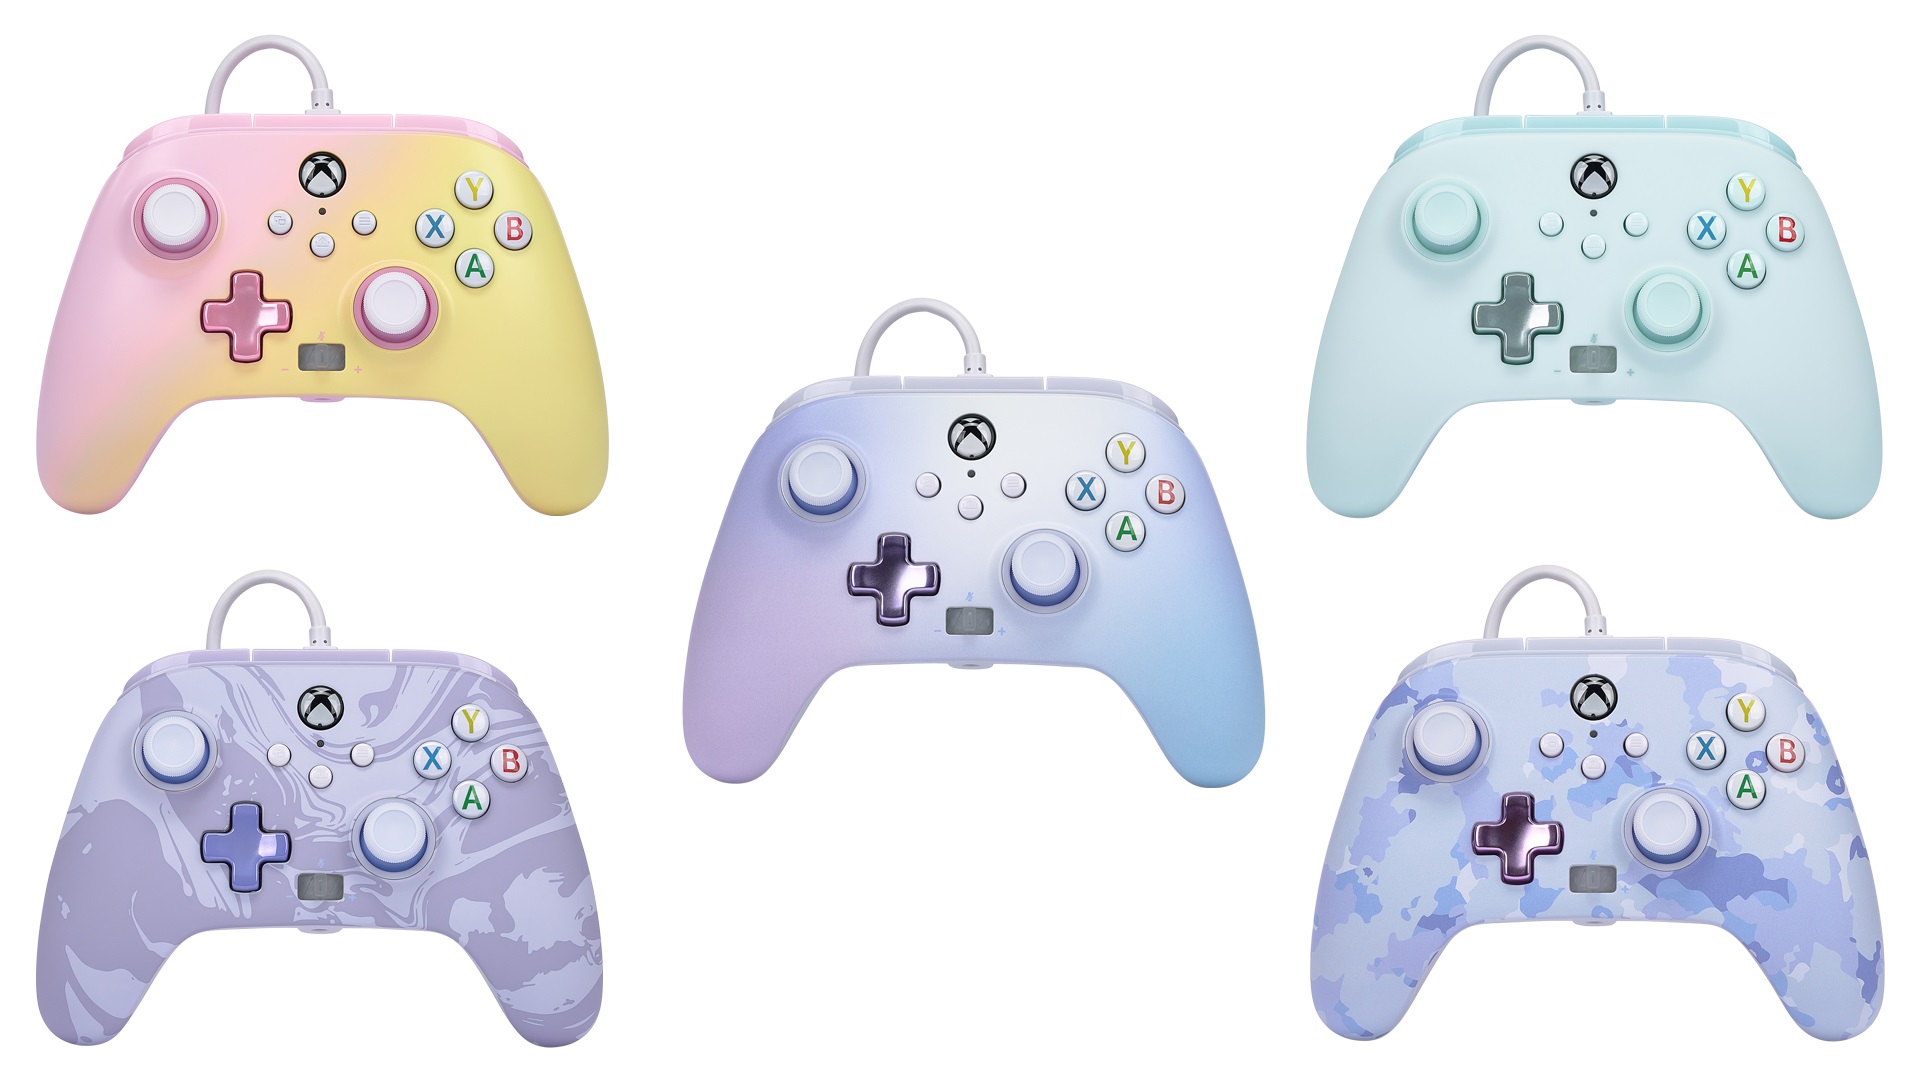 The Xbox 360 gamepad is back, and you can pre-order it now - Polygon